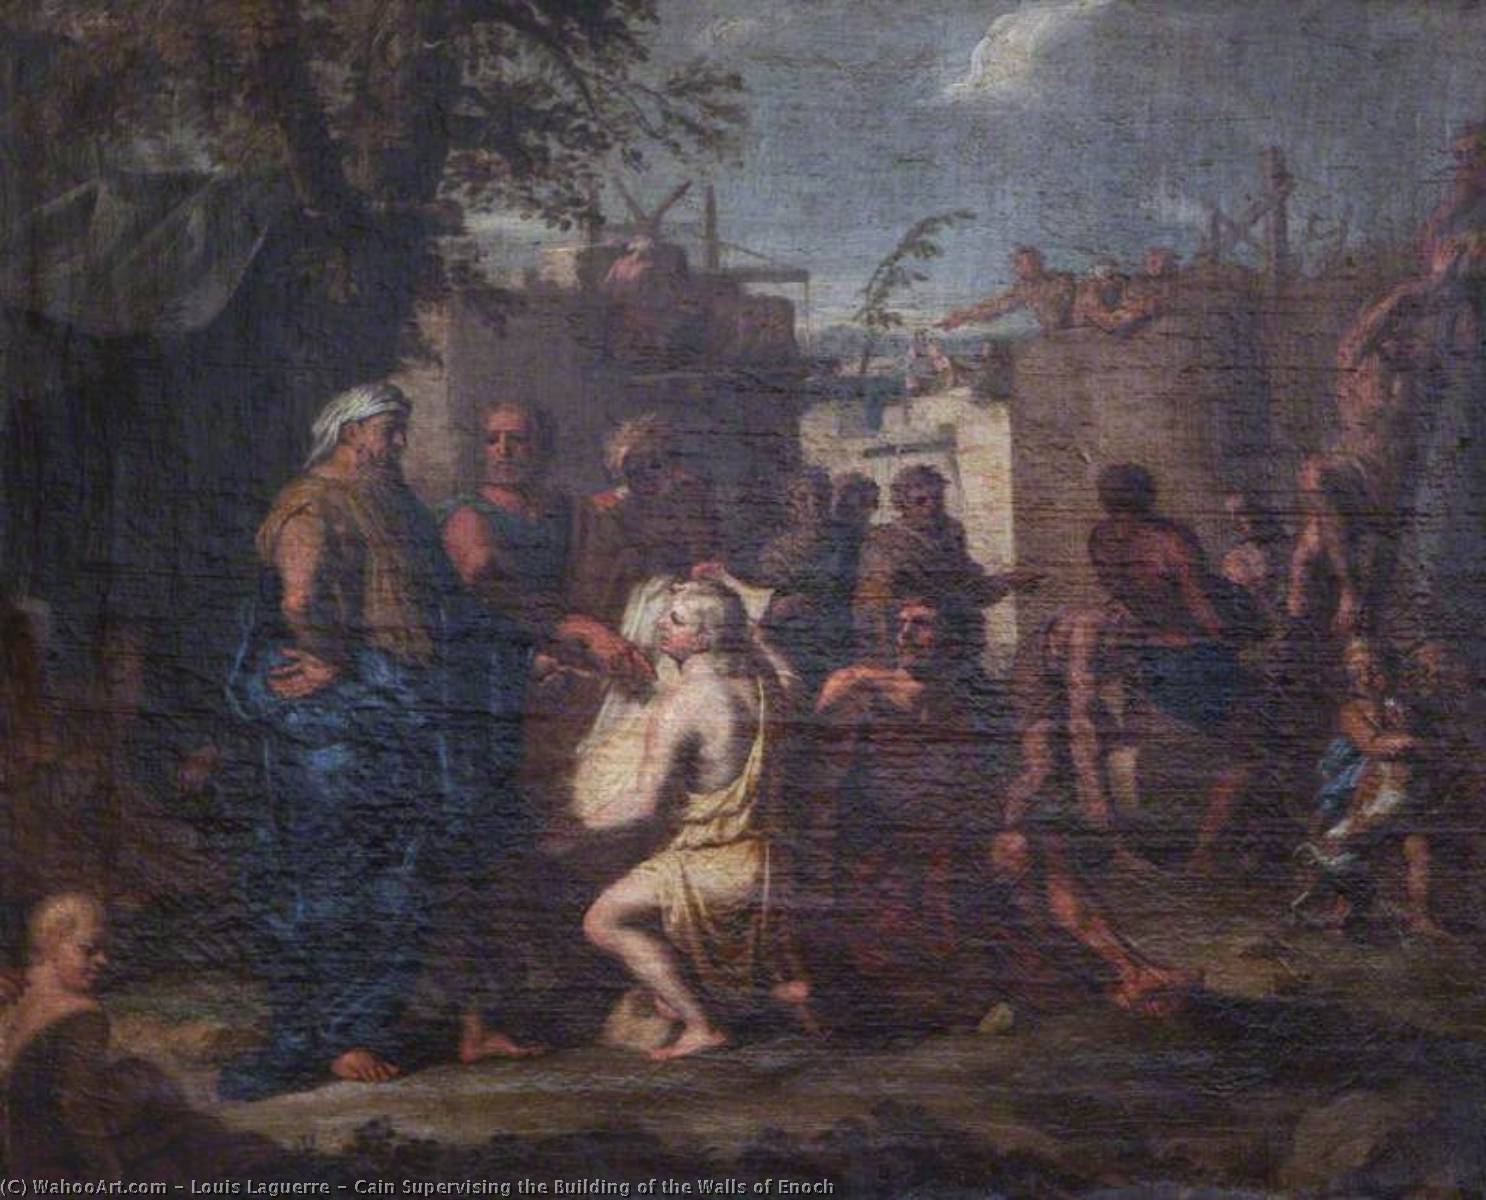 Buy Museum Art Reproductions Cain Supervising the Building of the Walls of Enoch by Louis Laguerre (1663-1721) | ArtsDot.com